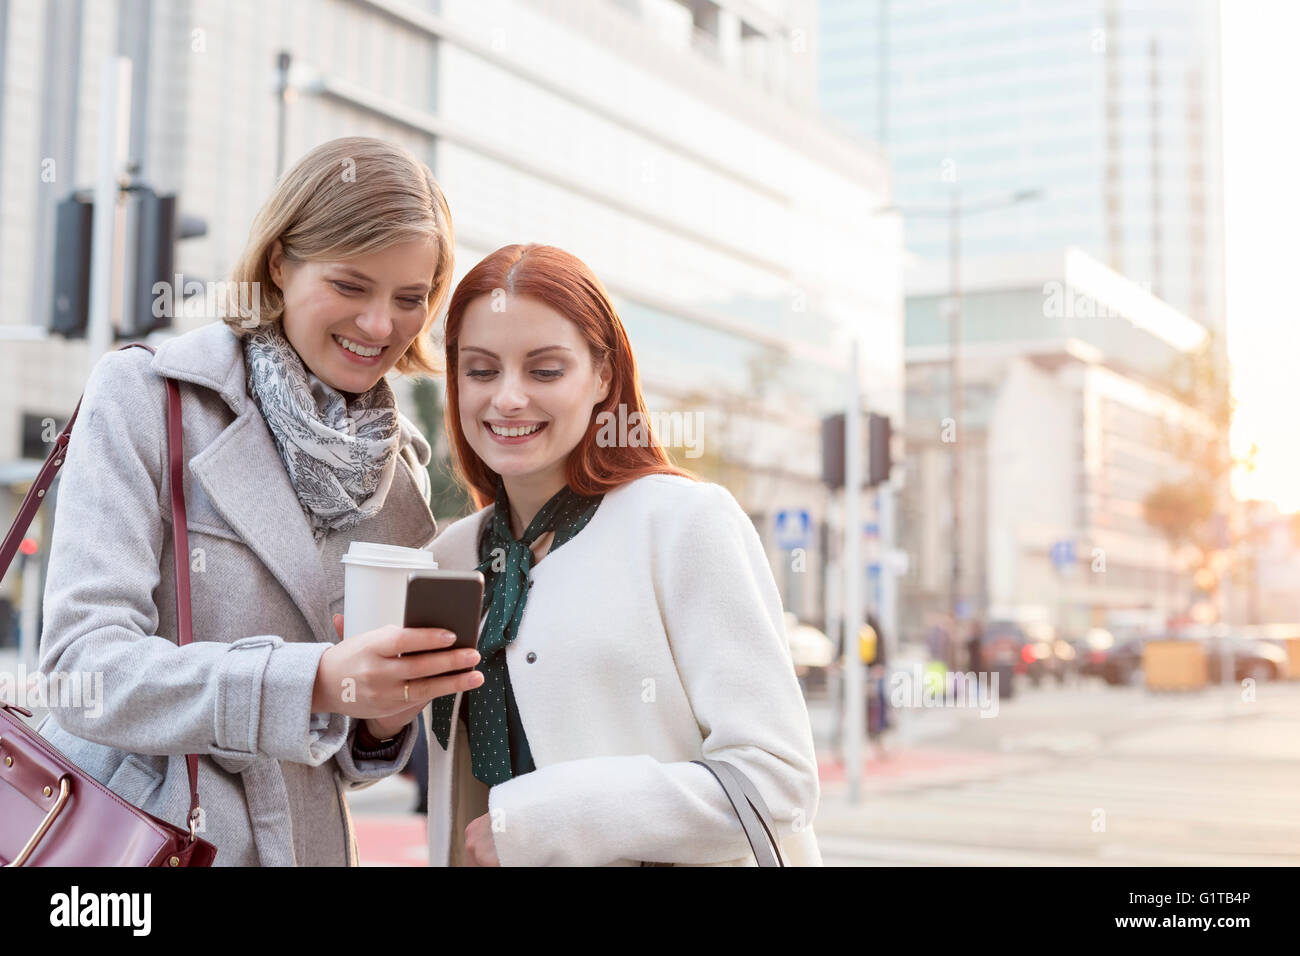 Smiling businesswomen texting and drinking coffee on city street Stock Photo